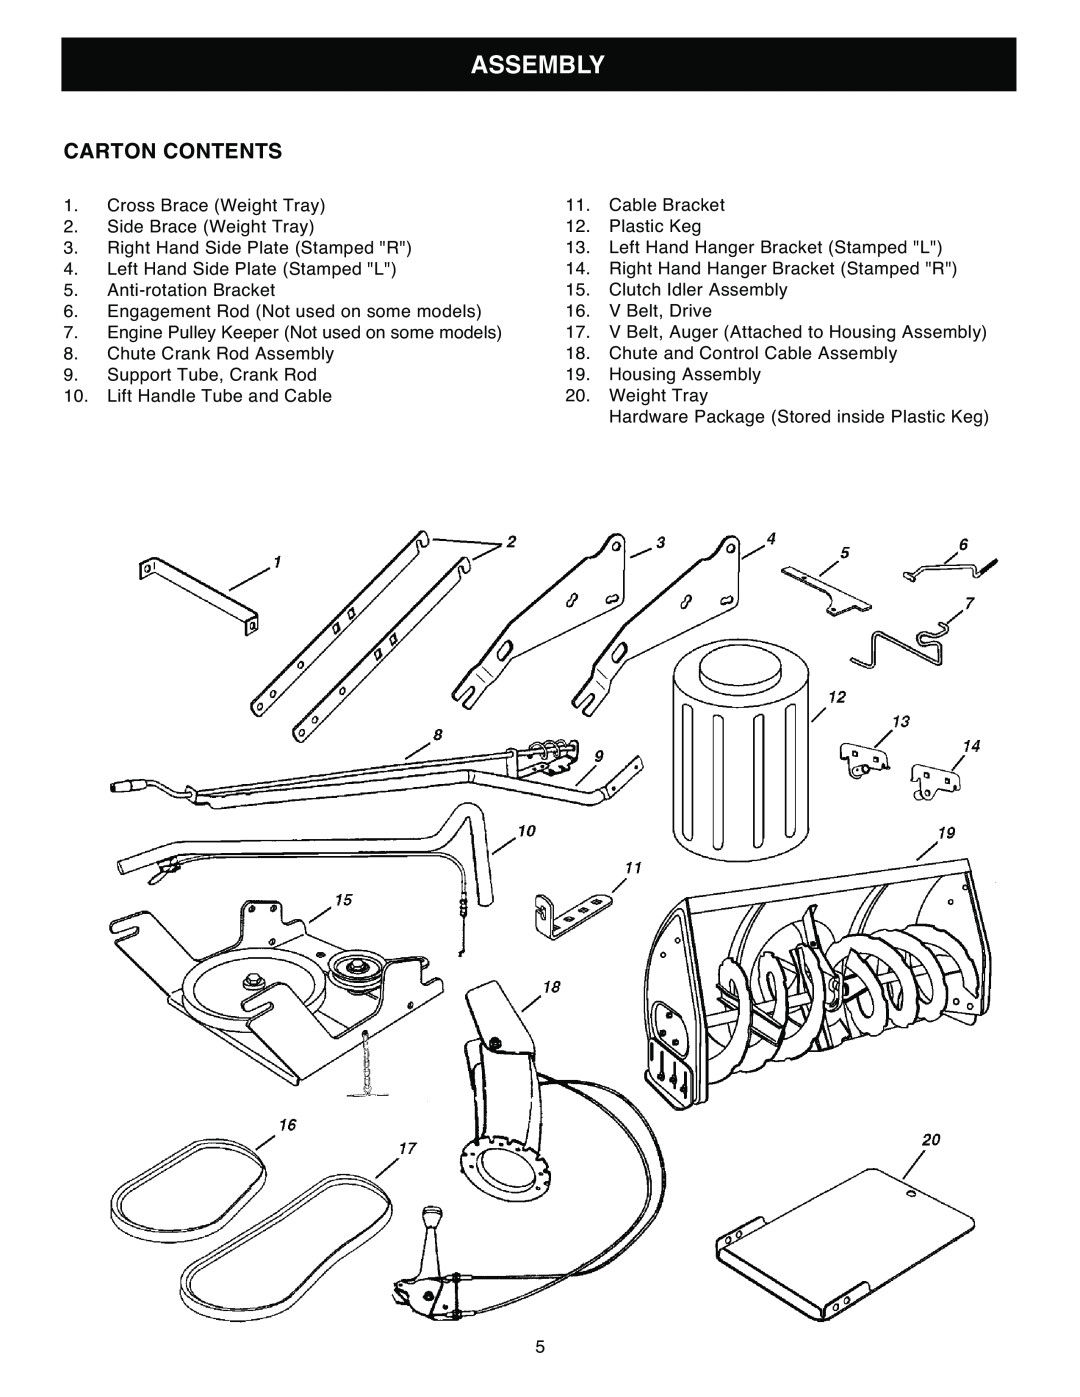 Sears 486.248392 owner manual Assembly, Carton Contents 